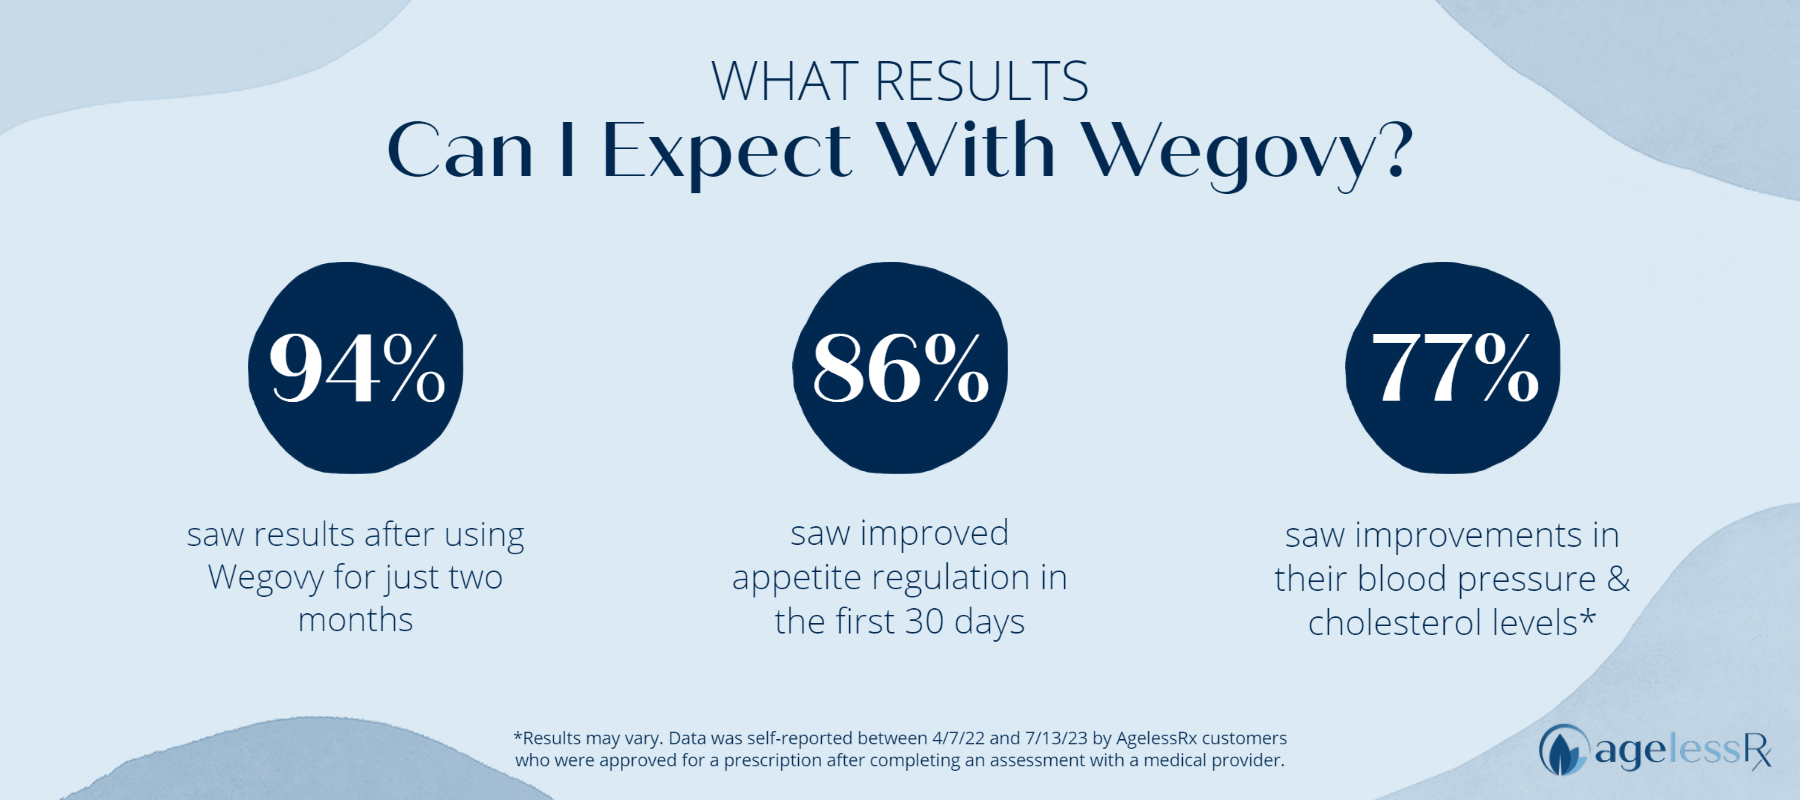 What can I expect with Wegovy?